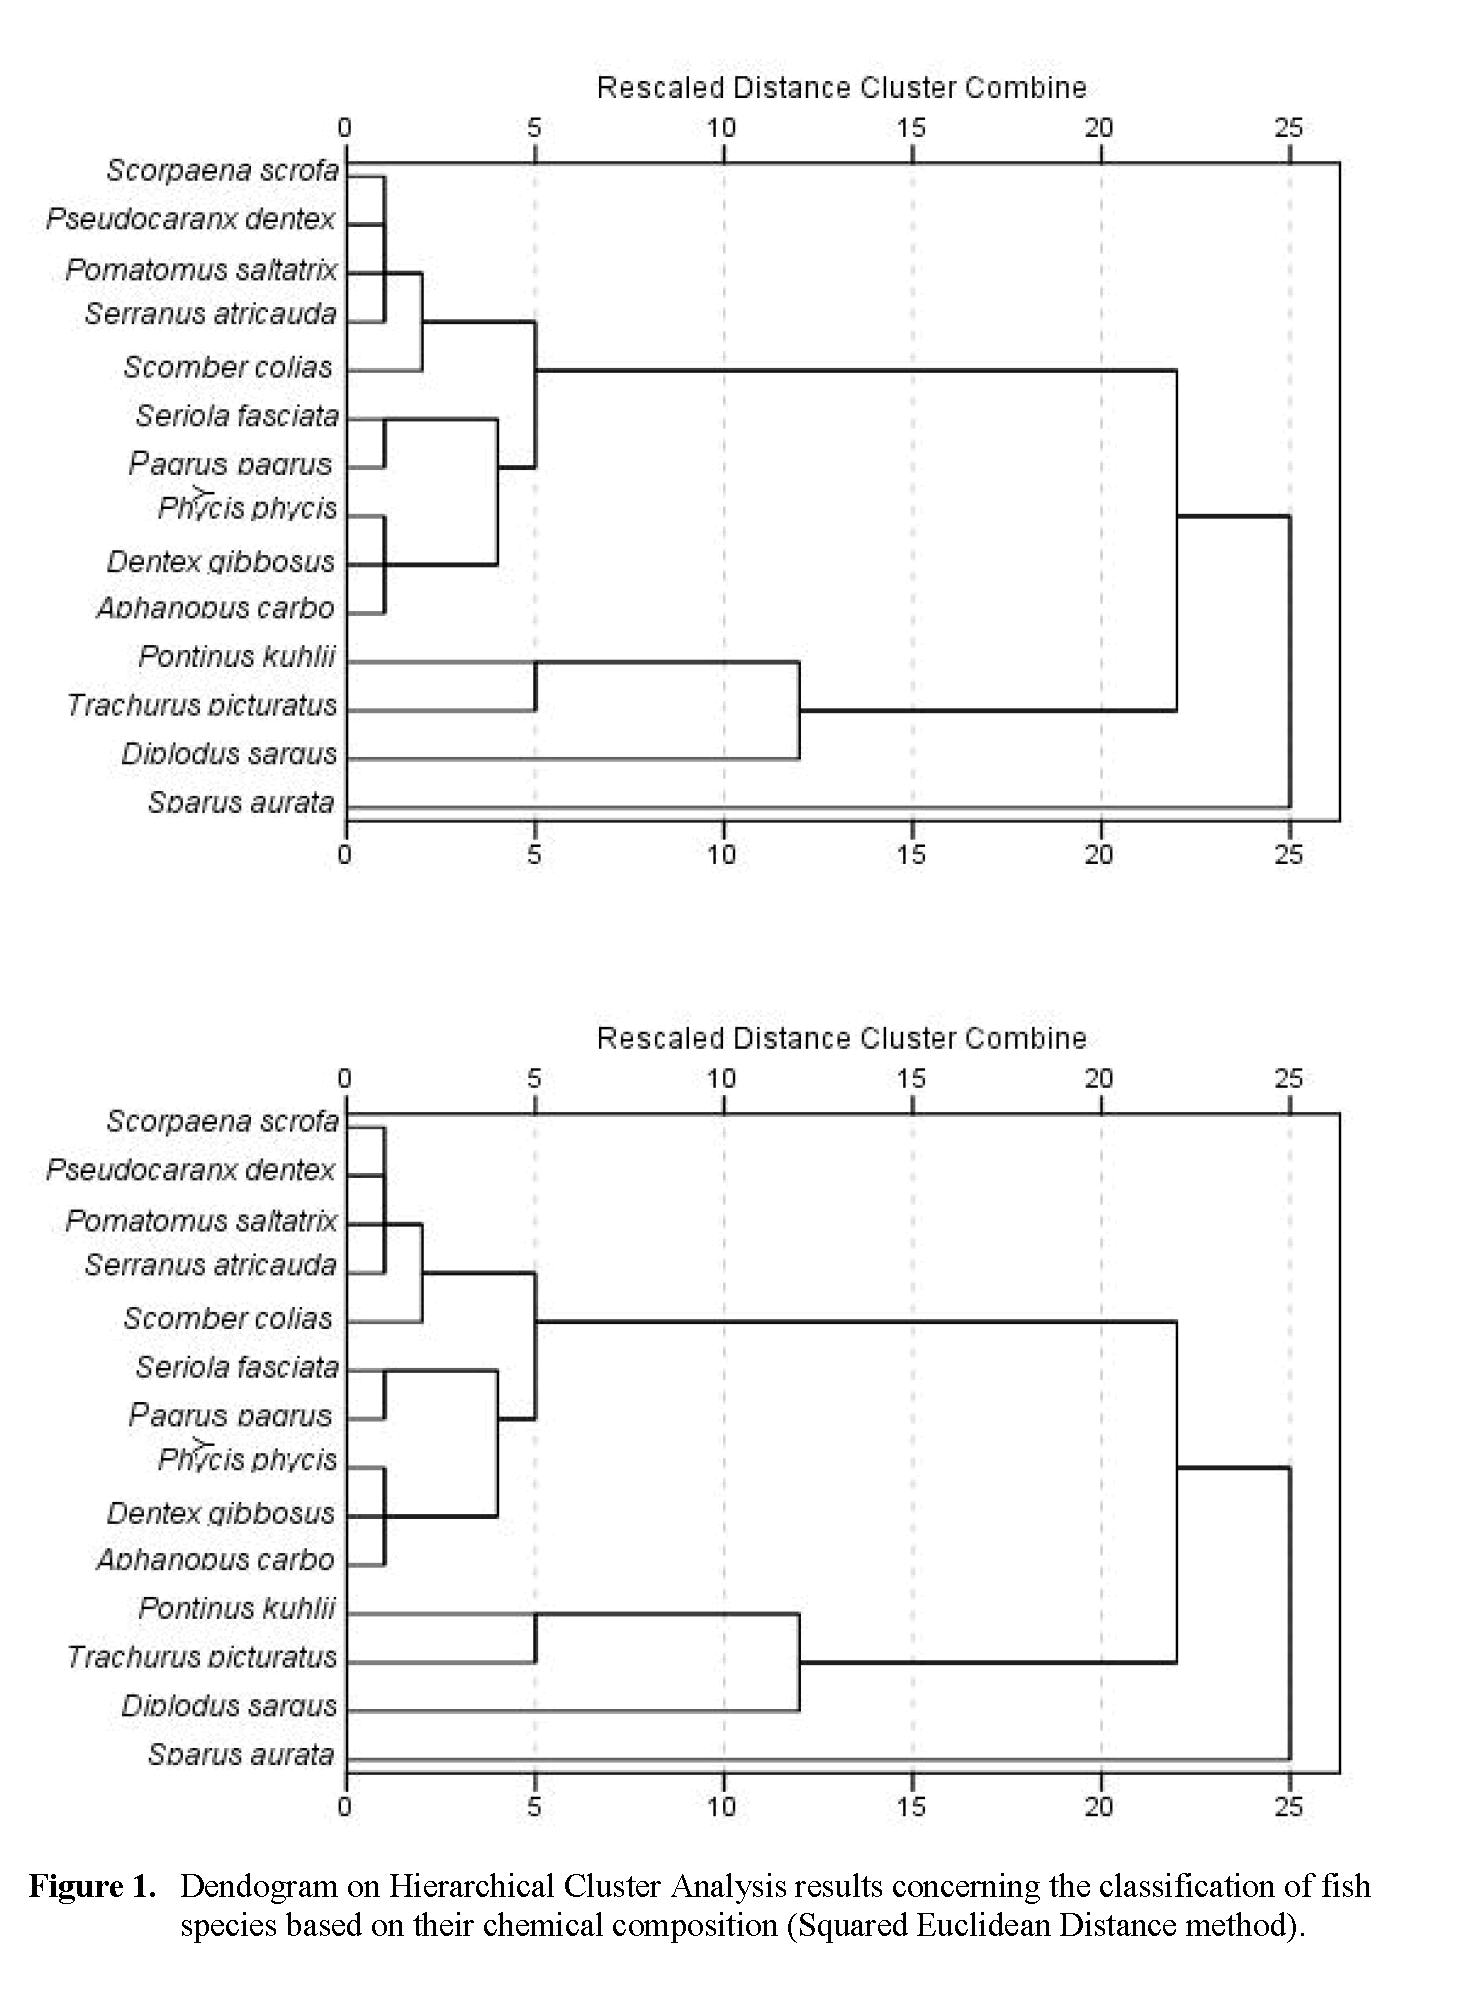 Fisheries-Sciences-Dendogram-Hierarchical-Cluster-Analysis-results